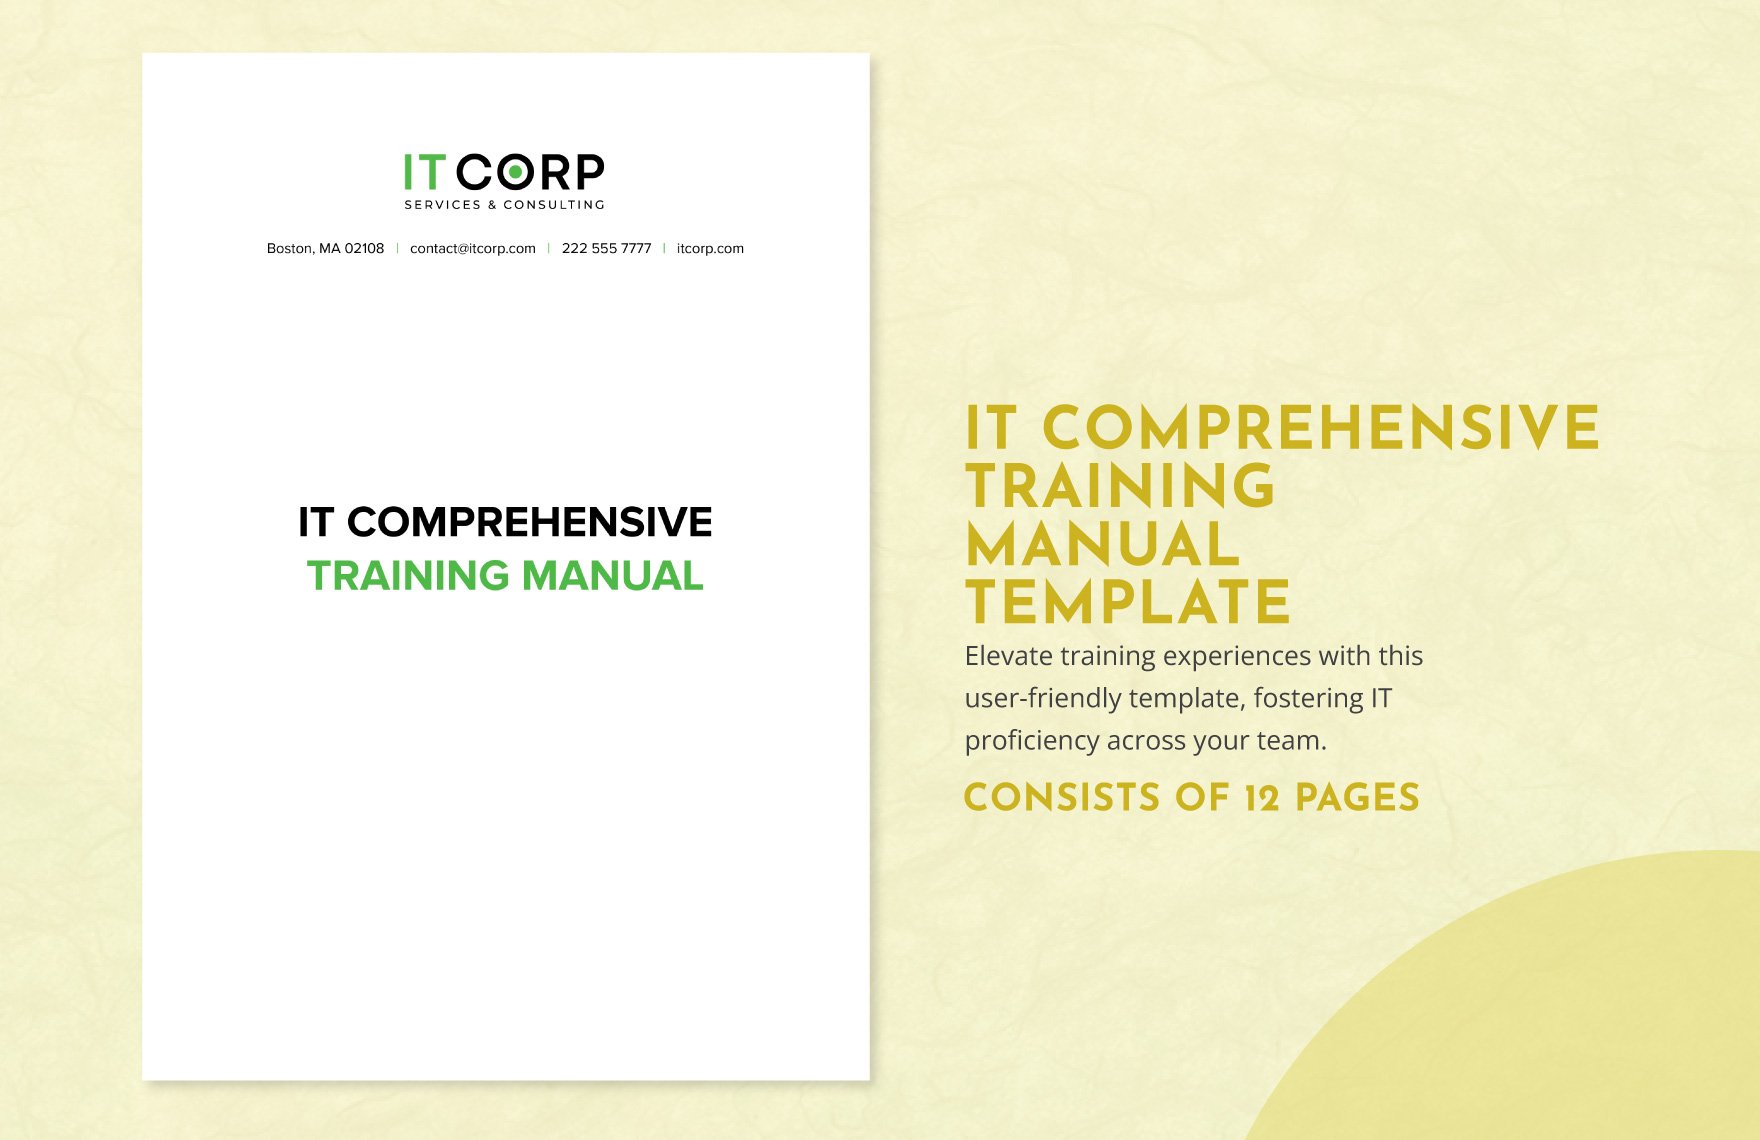 IT Comprehensive Training Manual Template